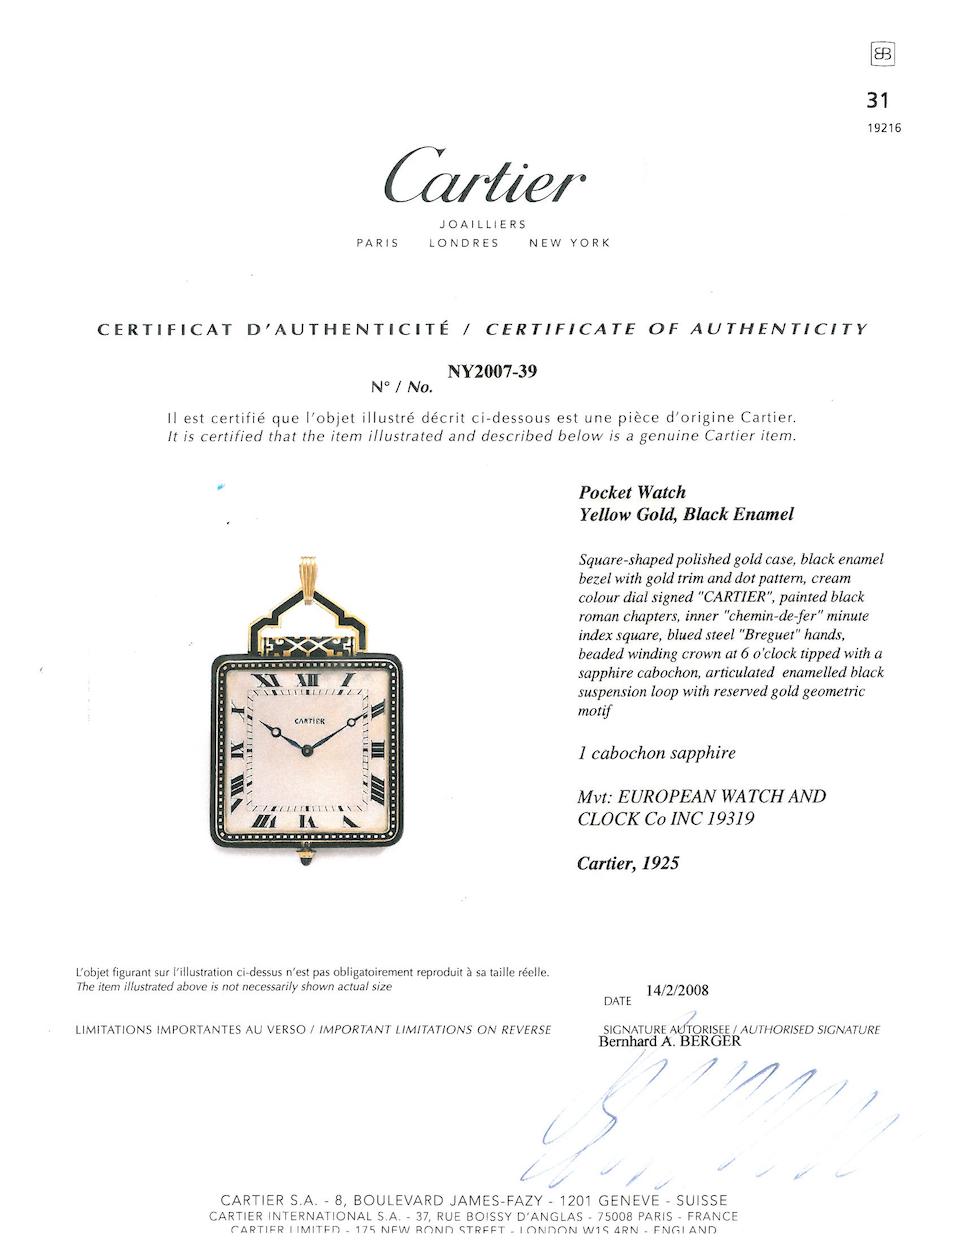 Cartier. A fine and rare enameled gold Art Deco pendant watchEuropean Watch and Clock Co., No. 19319, case with reference no. 145, sold 1925